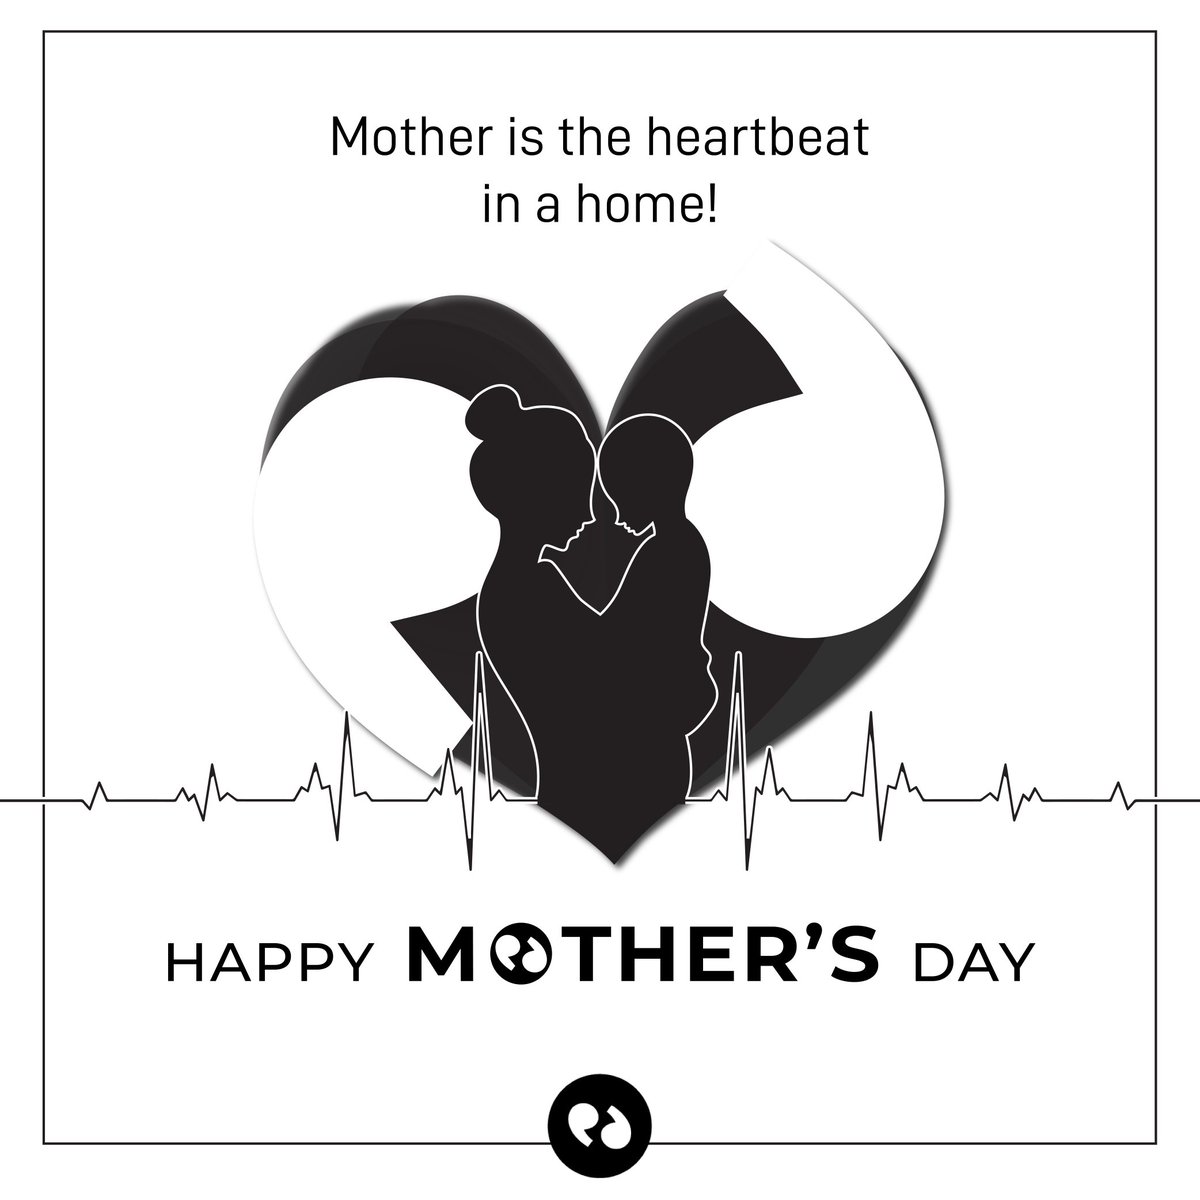 Life doesn’t come with a manual, but it does come with a Mother and they are an inspiration to all! Happy Mother’s Day! 

#reflect #livereflect #reflectapp #mothersday #momsday2021 #celebratingmothers #homeiswheremomis #happymothersday